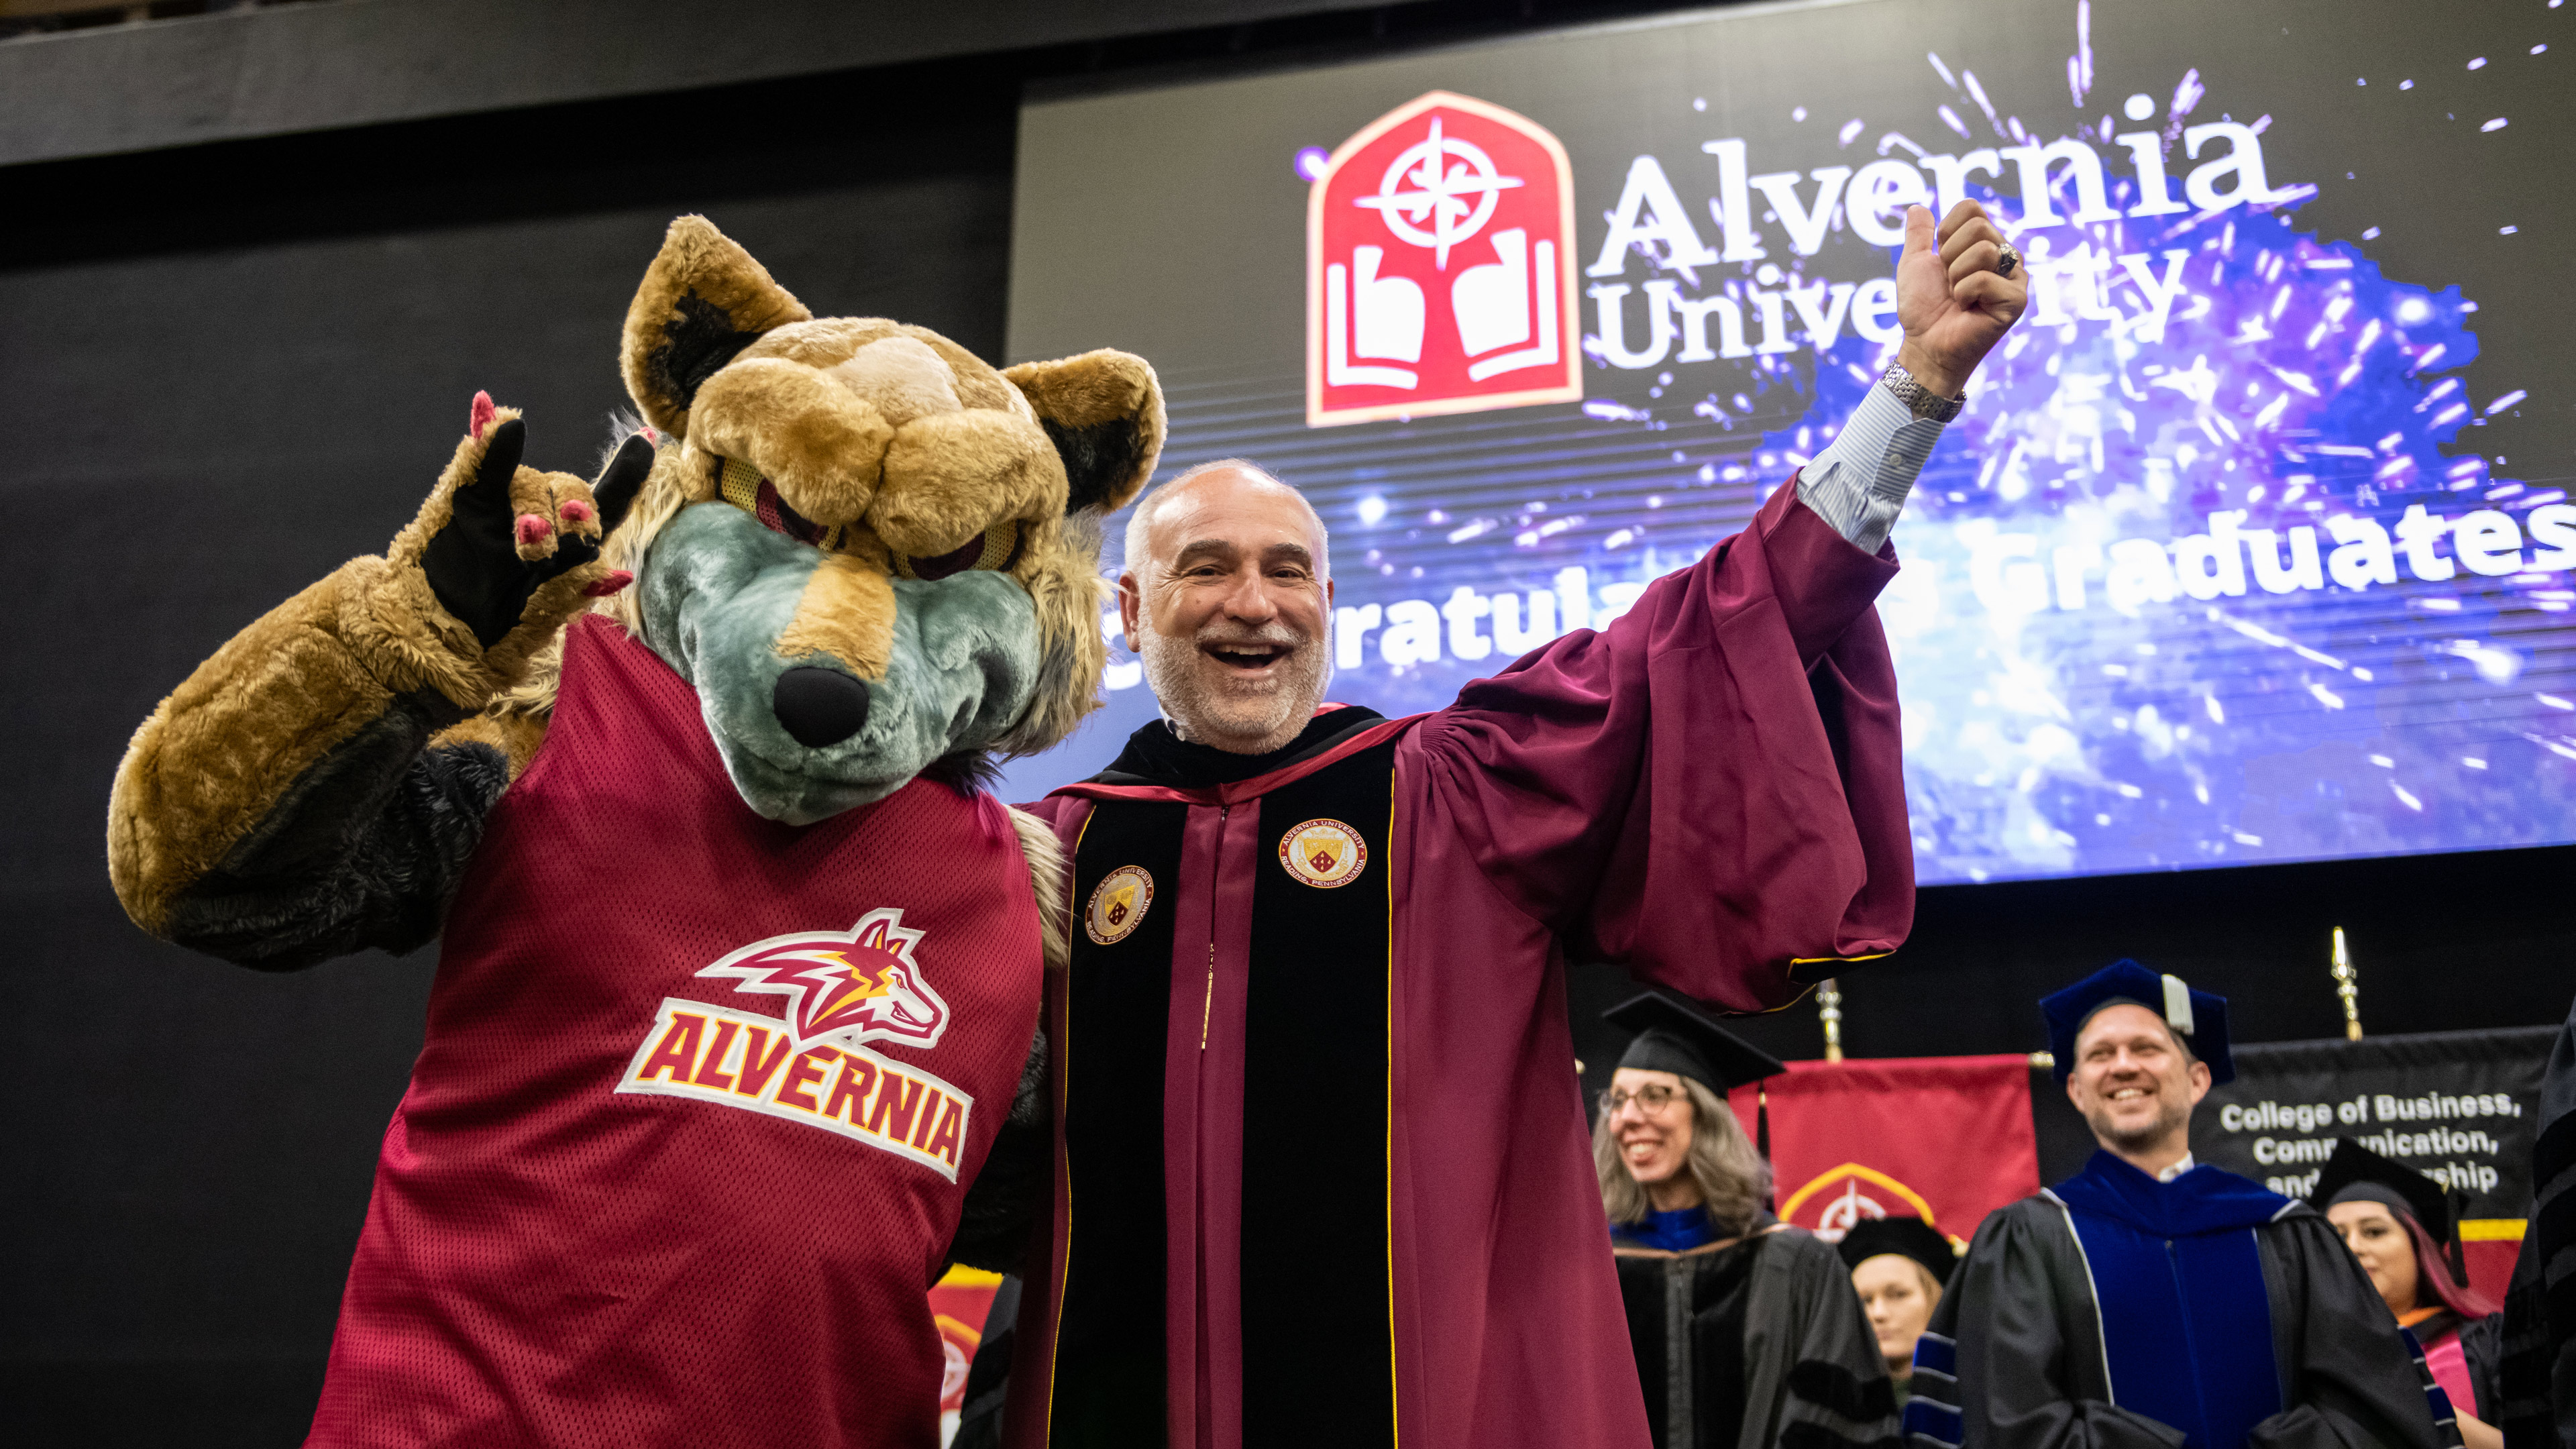 Alvernia President John R. Loyack and the Alvernia Golden Wolf at the 2022 Commencement Ceremony